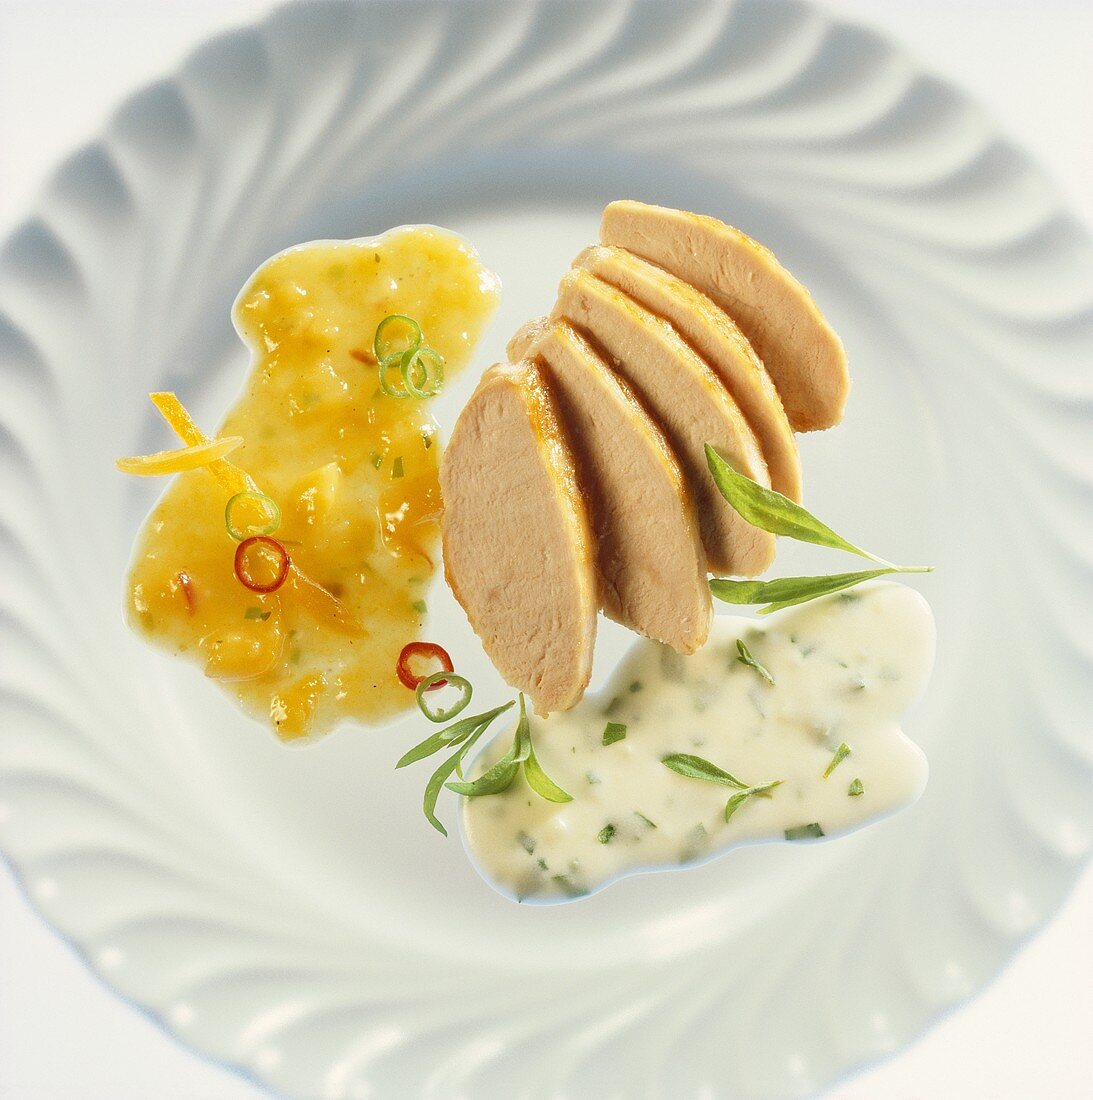 Slices of chicken breast with mango & tarragon sauce on plate